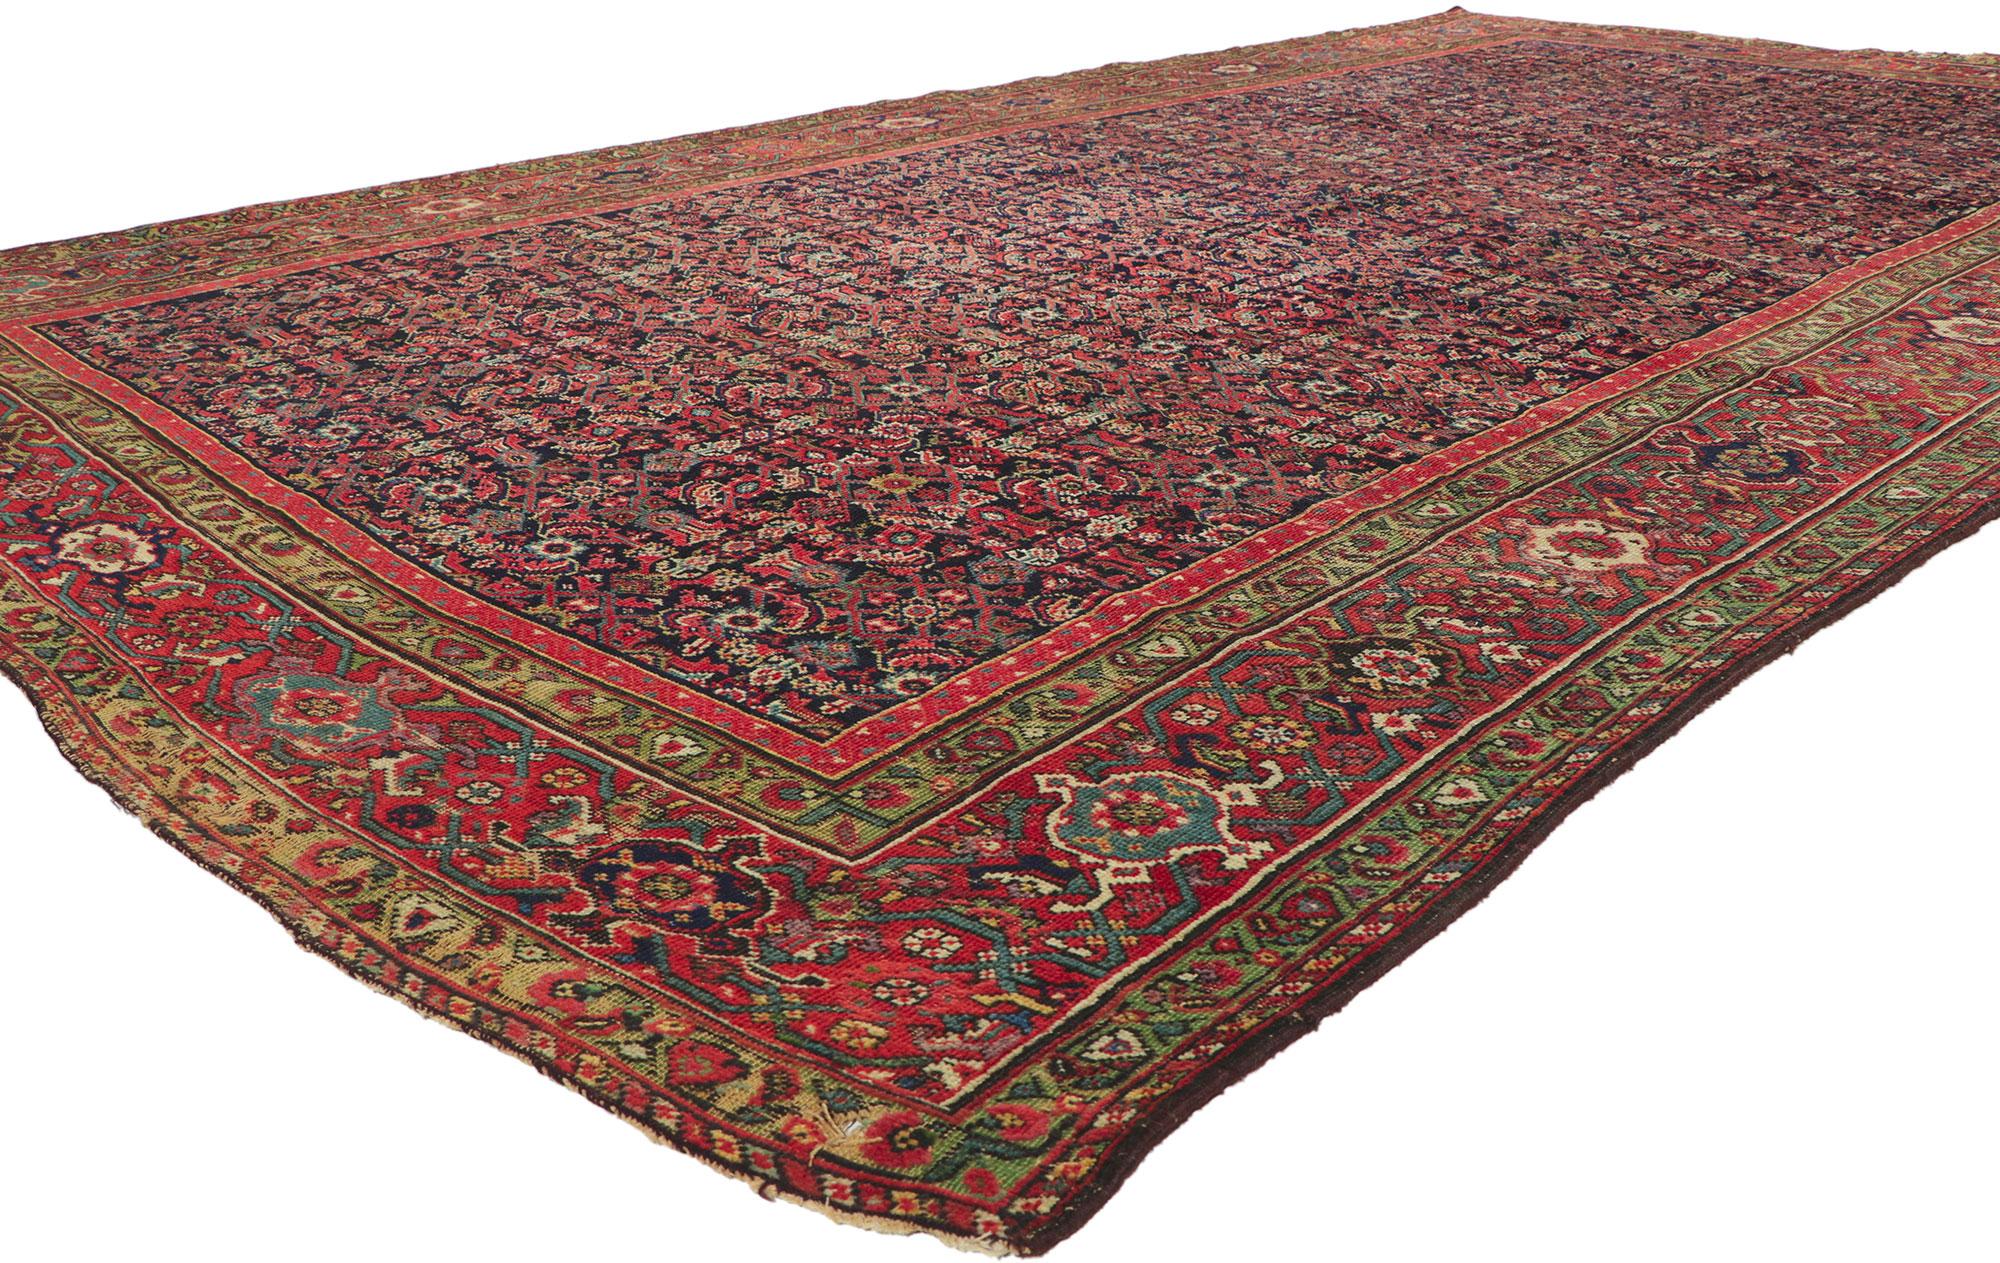 76803 Late 19th Century Antique Persian Farahan Rug with Modern Style, Persian Gallery Rug 06'11 x 13'01. Sophisticated and full of character, this late 19th century antique Persian Farahan rug combines traditional character with modern style. With